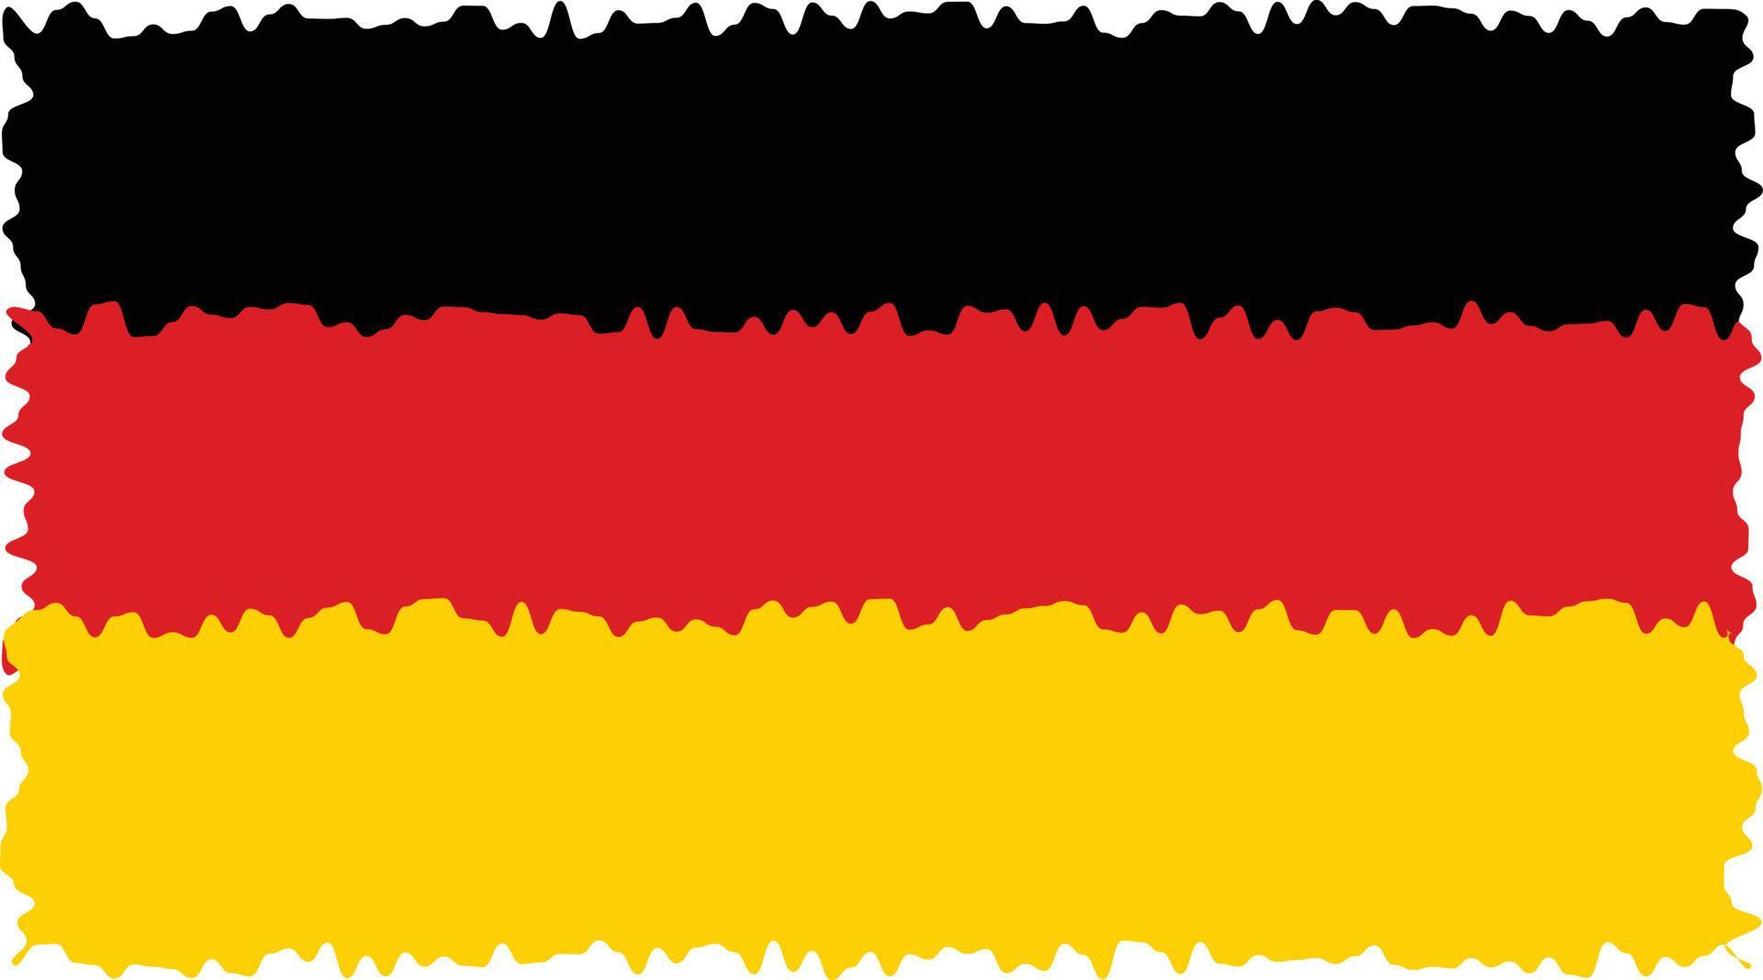 Germany, Brush stroke flag of Germany, Grunge German flag, flag vector illustration, watercolor style flag of Germany, suitable for t shirt print and social media, sign and tag for German products